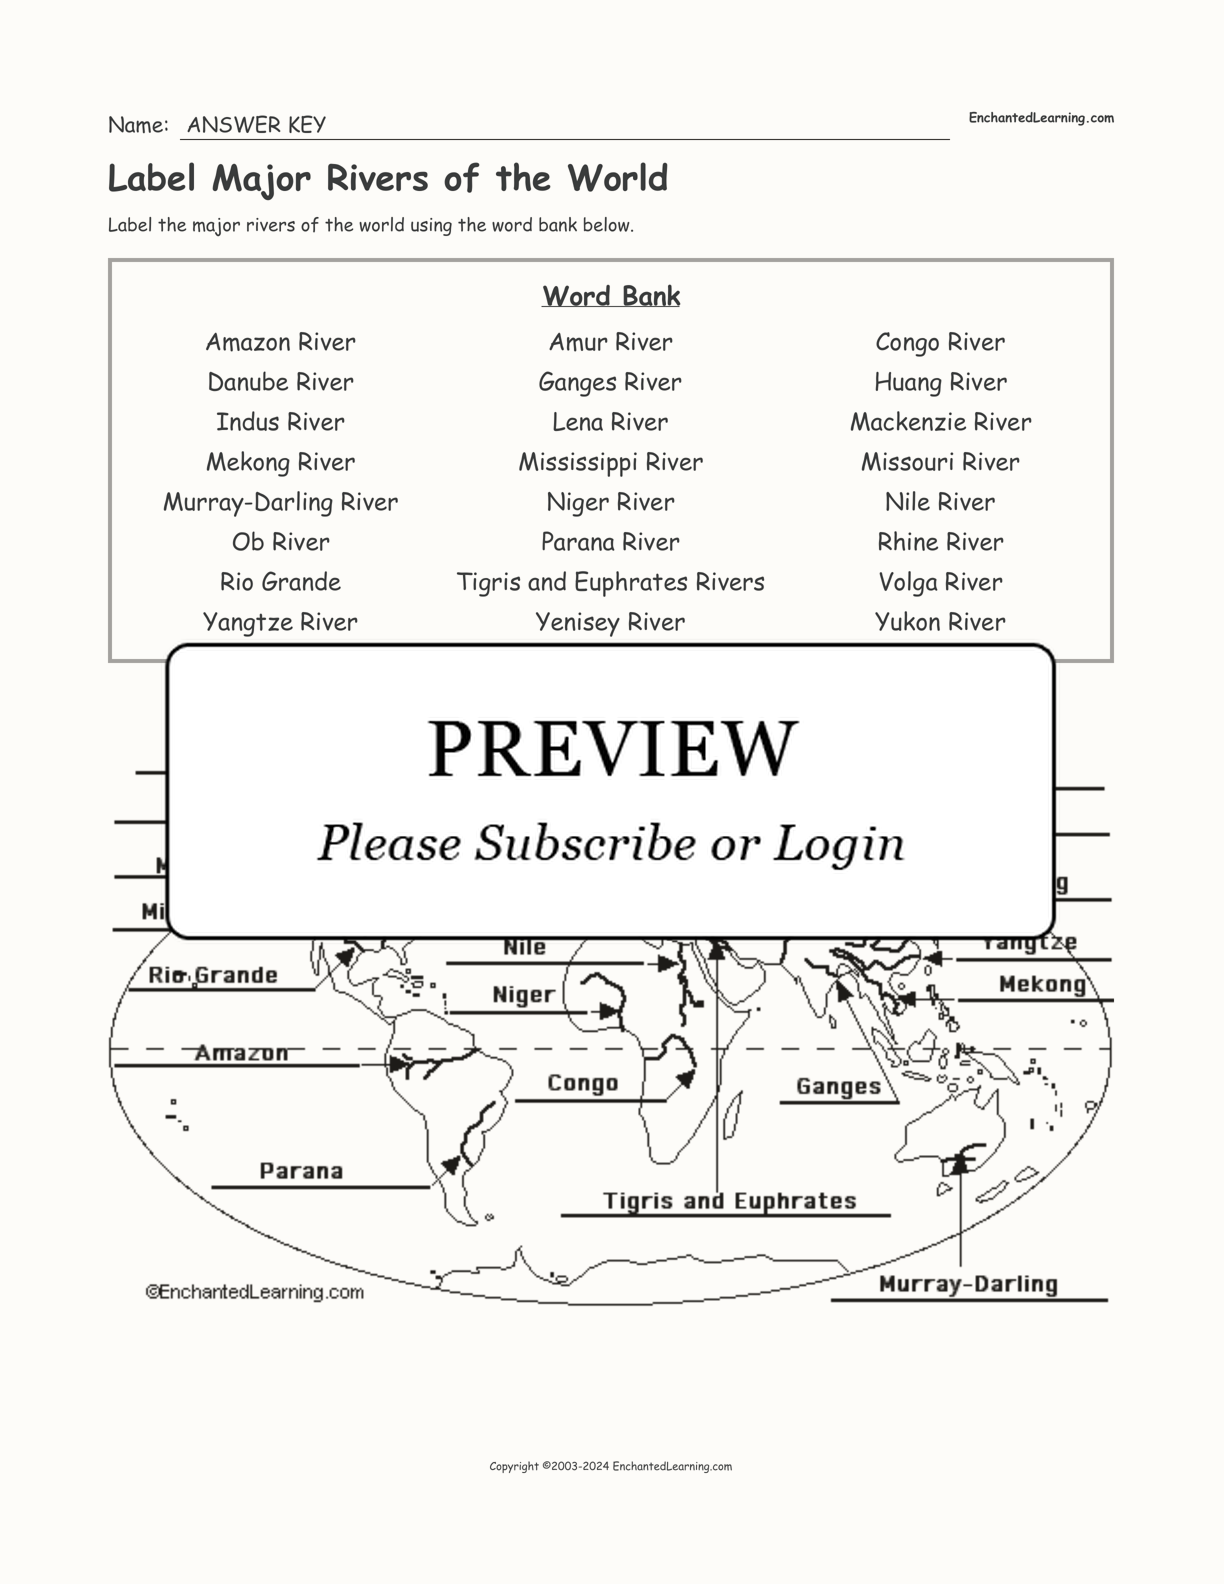 Label Major Rivers of the World interactive worksheet page 2